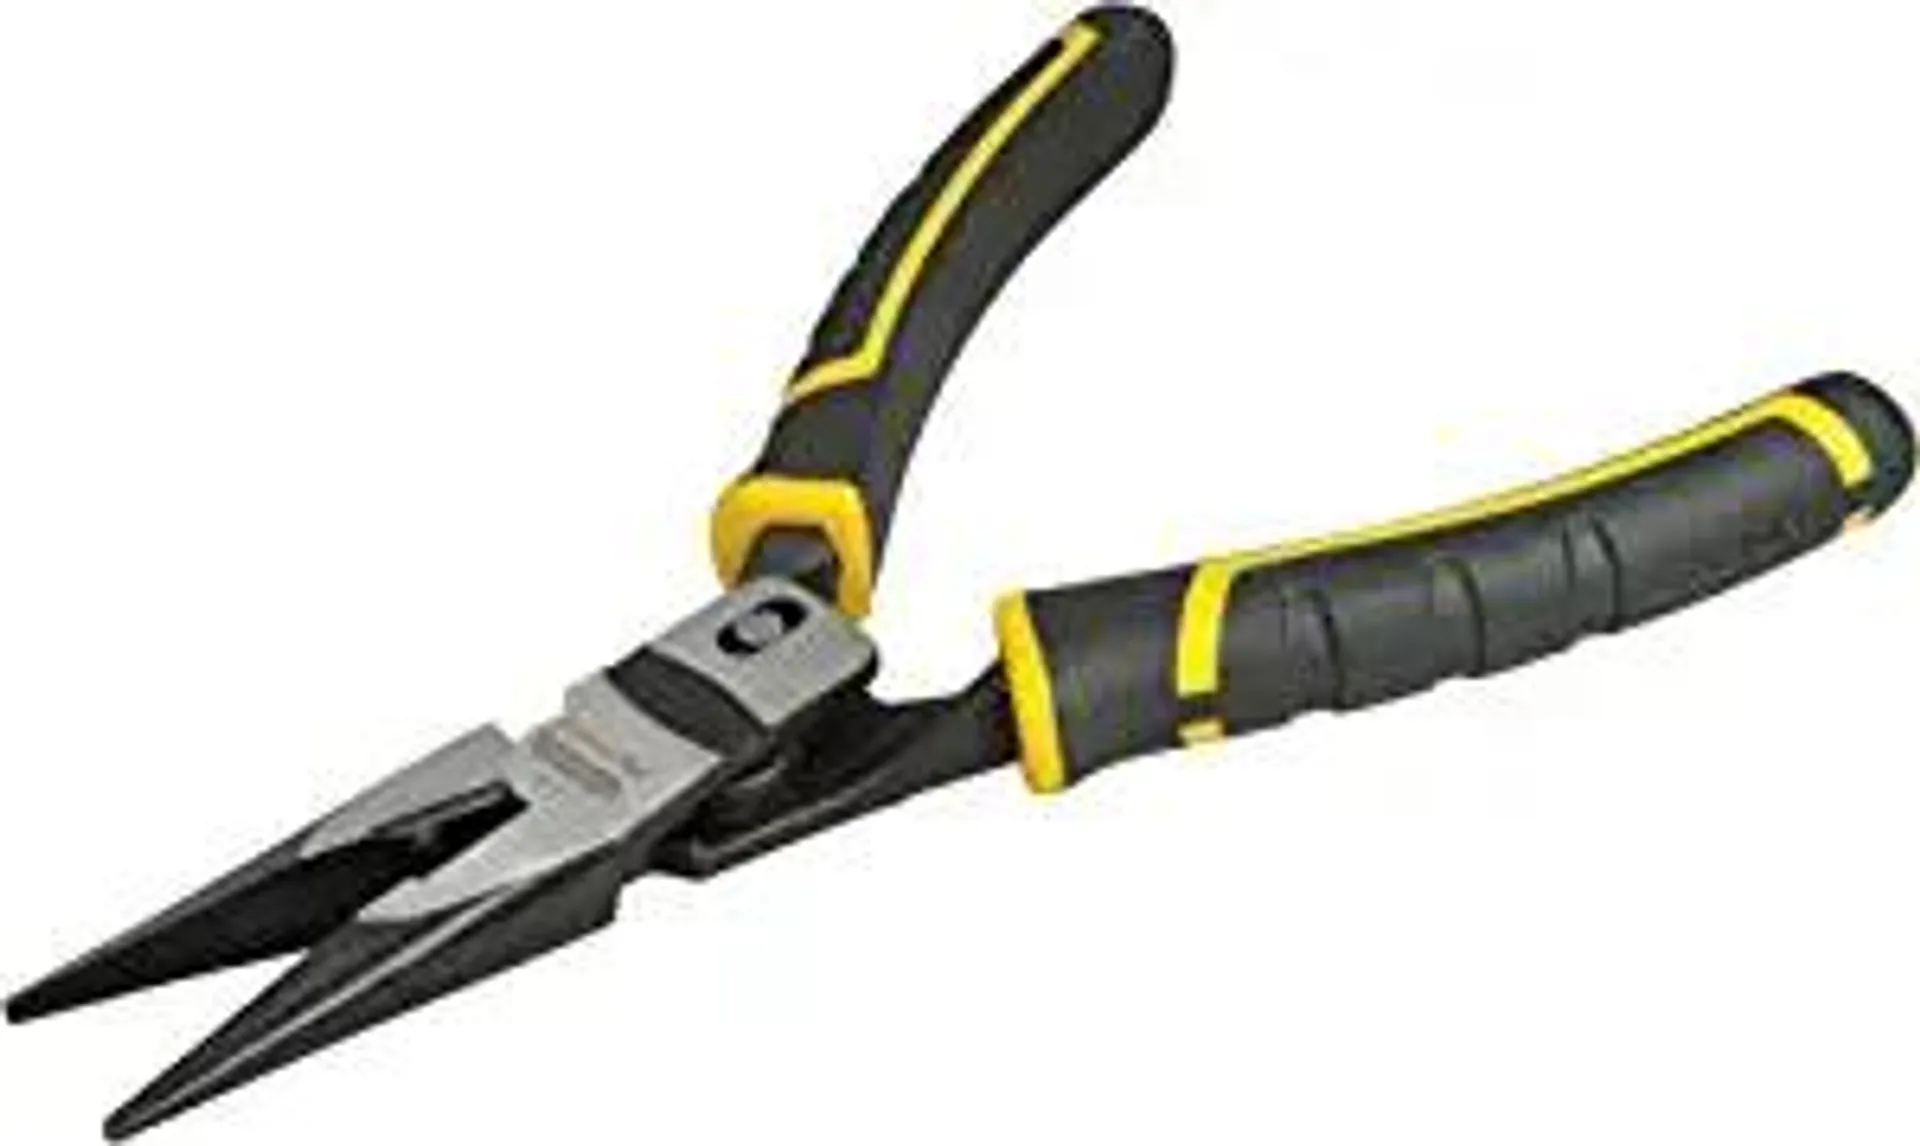 Stanley FMHT0-70812 Compound Action Plier long nose, Black/Yellow